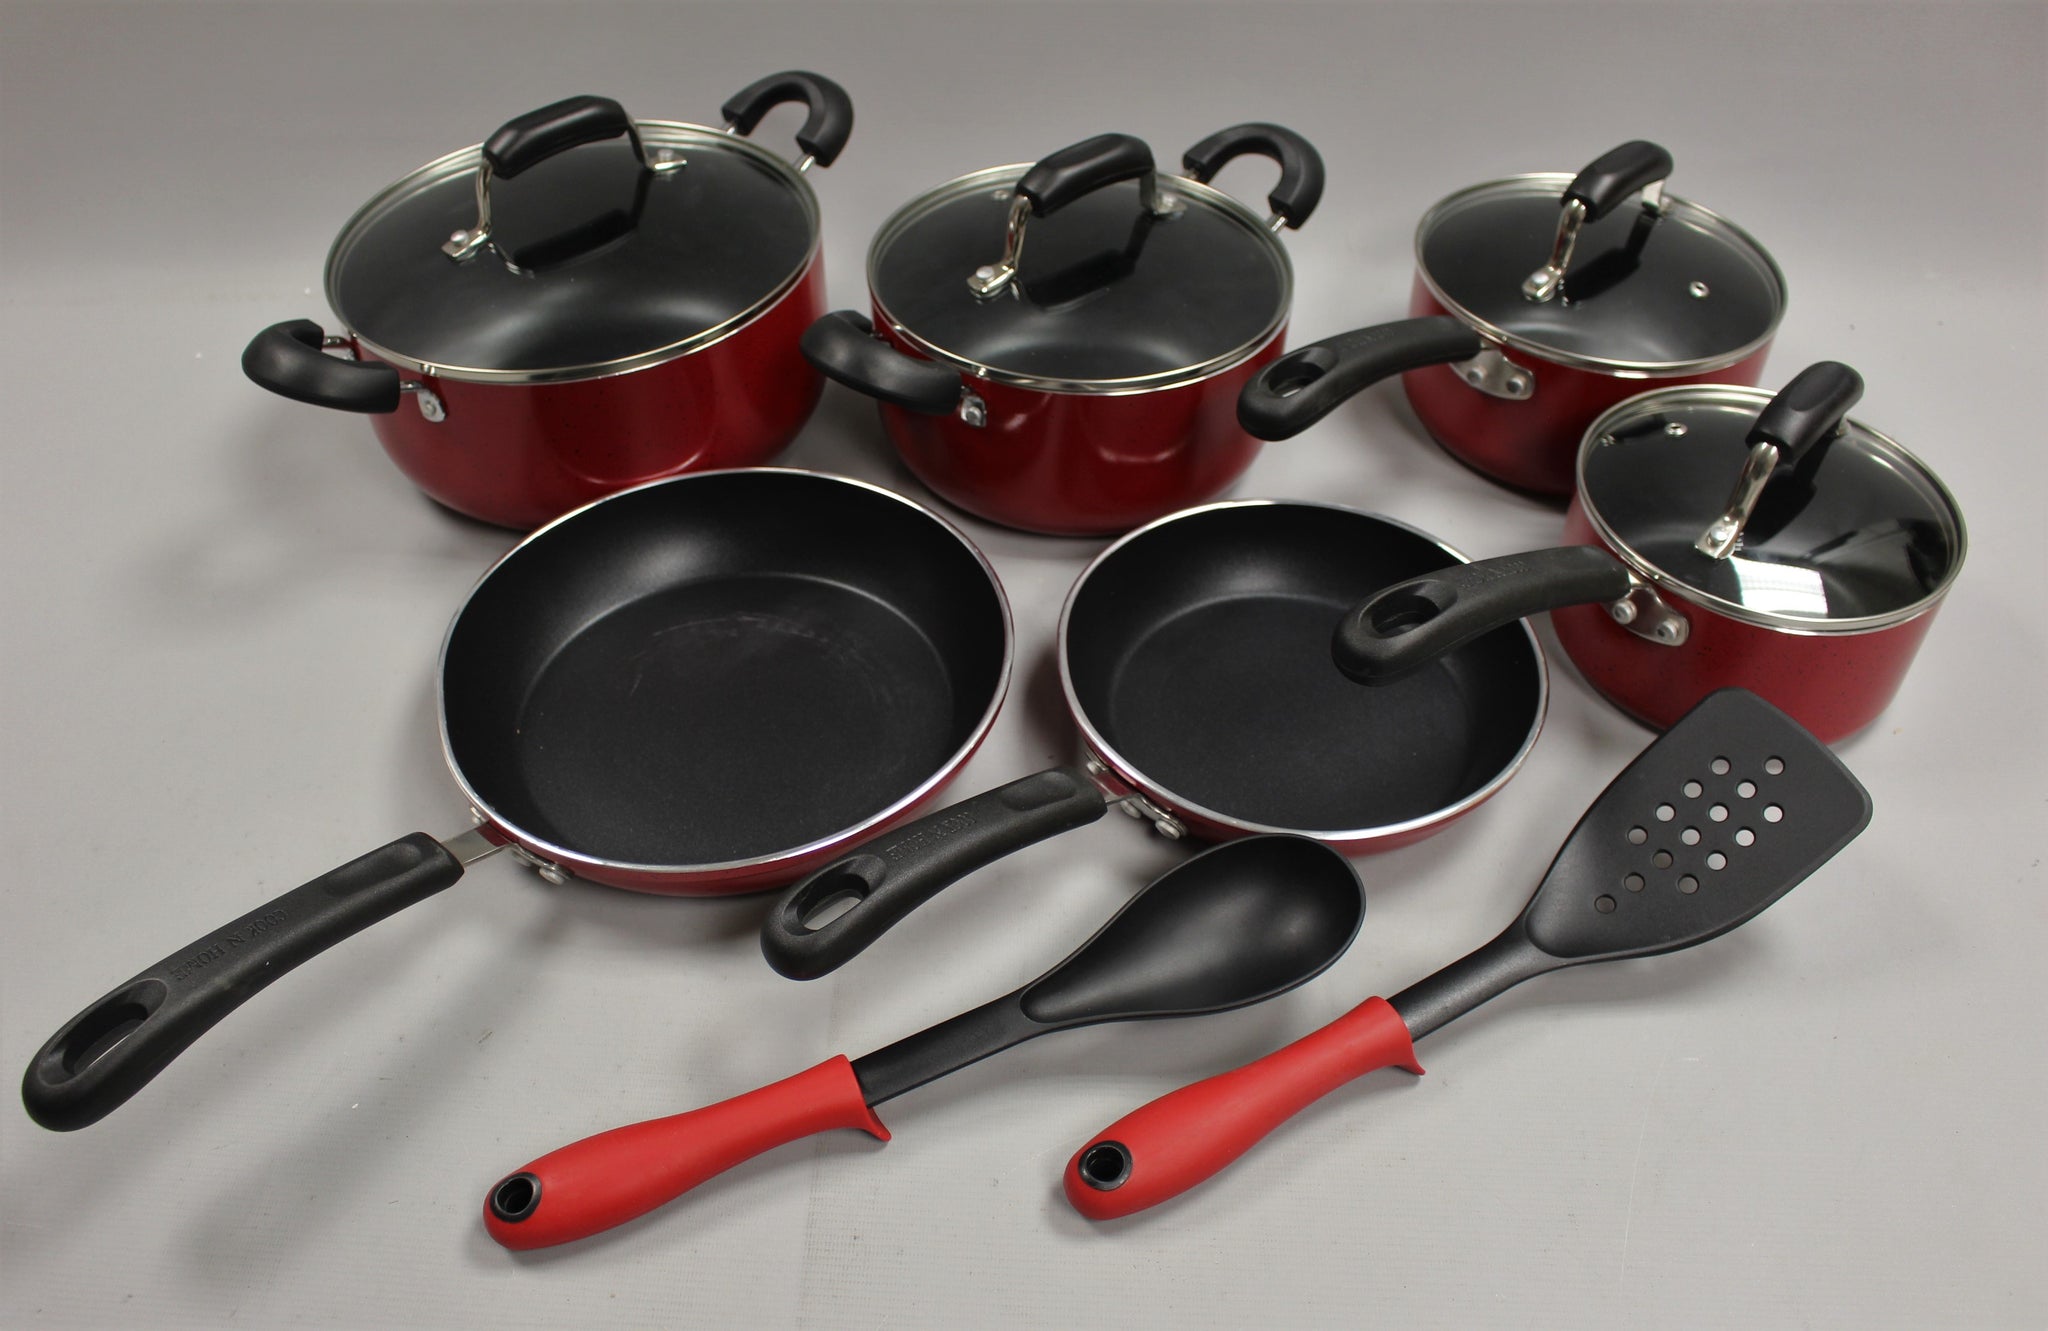 Nonstick Cookware Set, 12 Pieces Healthy Cooking, Vented Lids